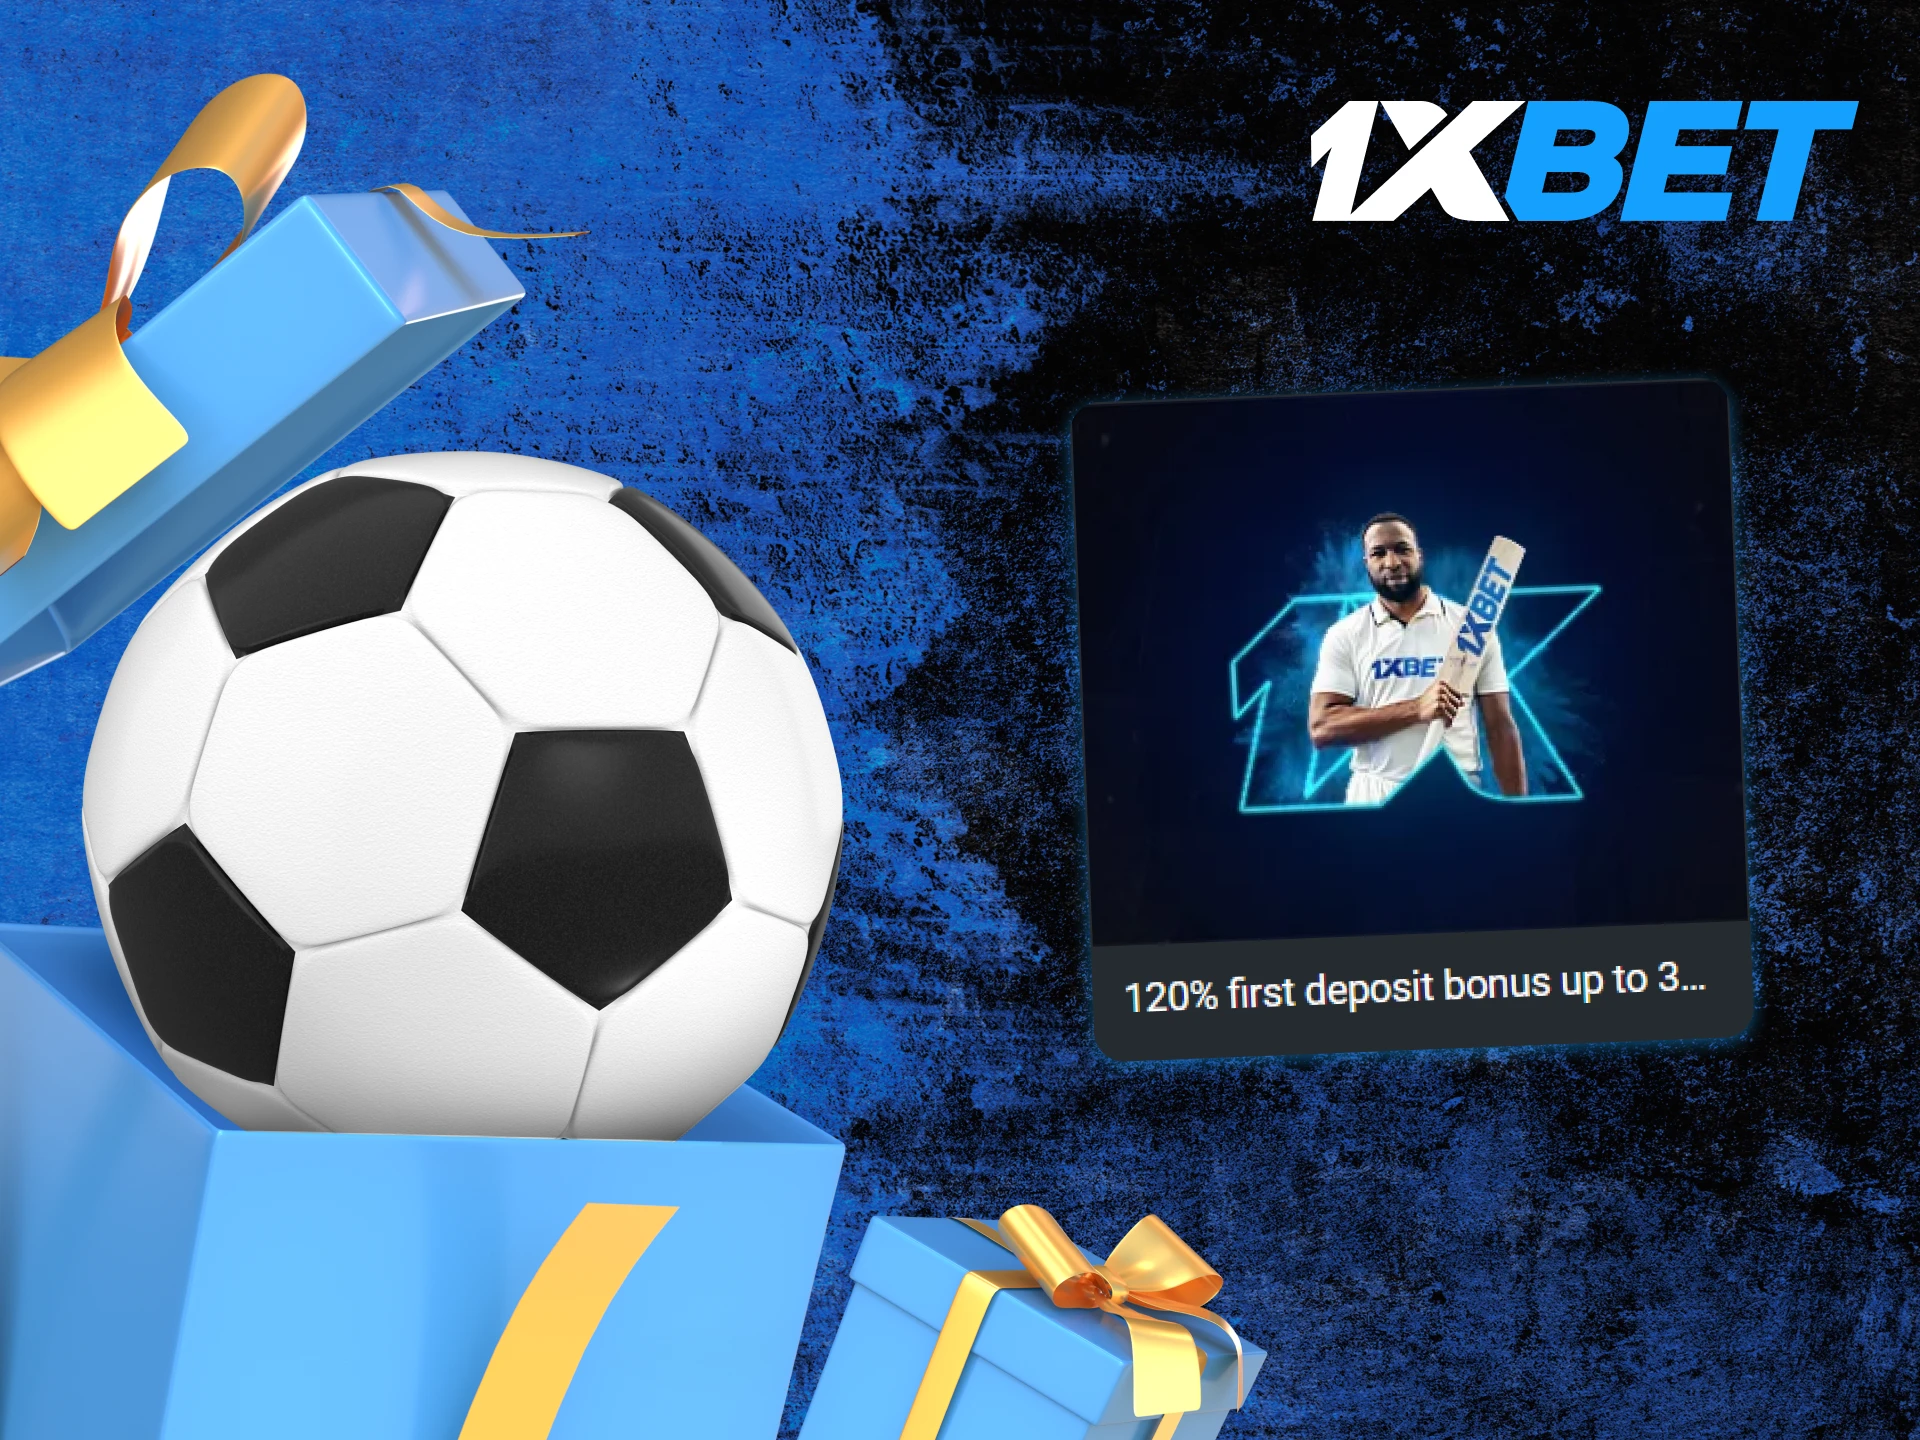 1xBet offers a great welcome bonus for football betting.